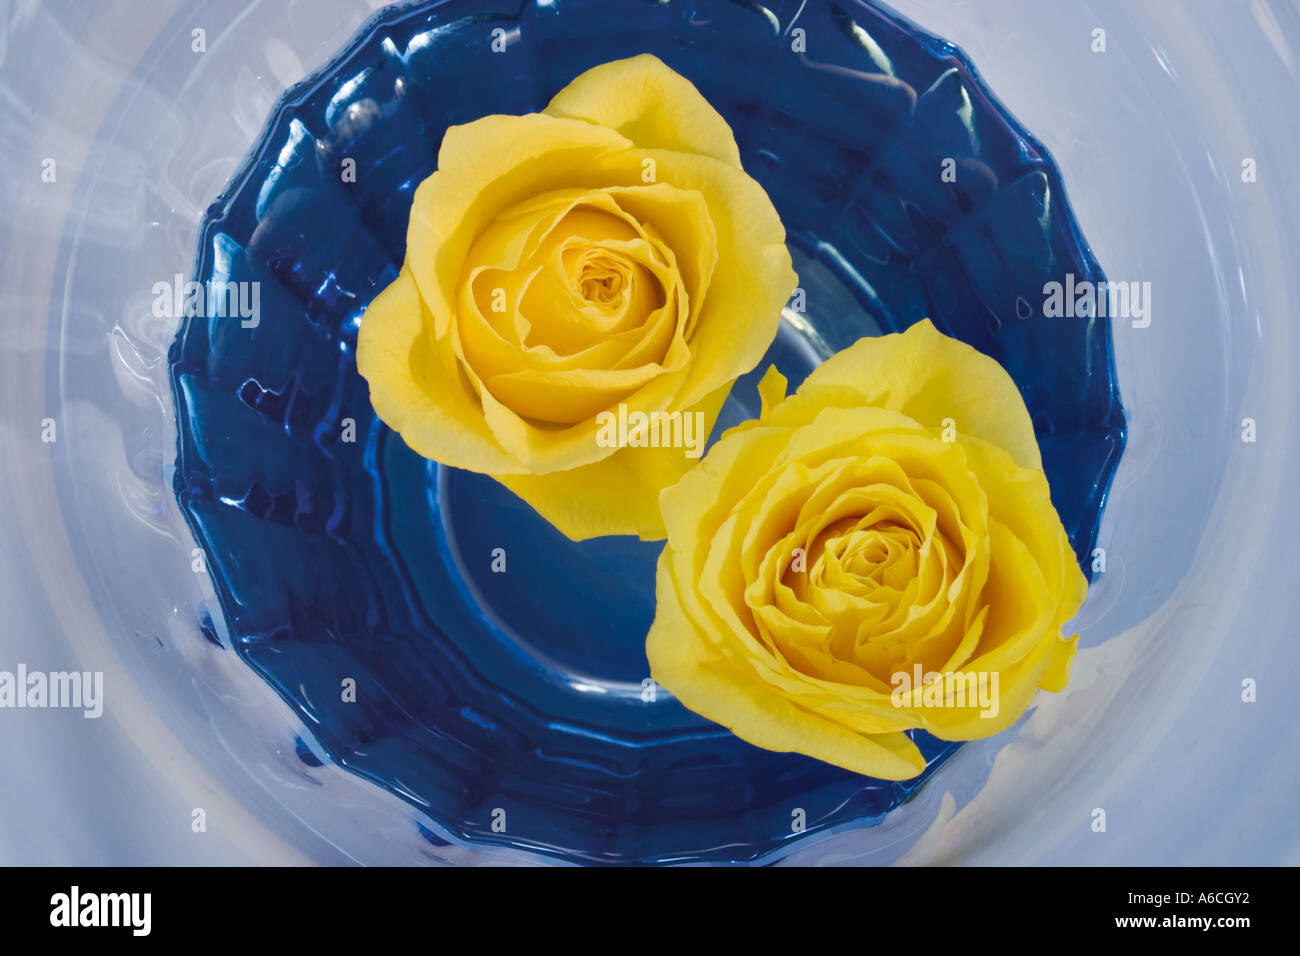 two yellow rose or rosa kronus floating on water in a blue vase Stock Photo  - Alamy